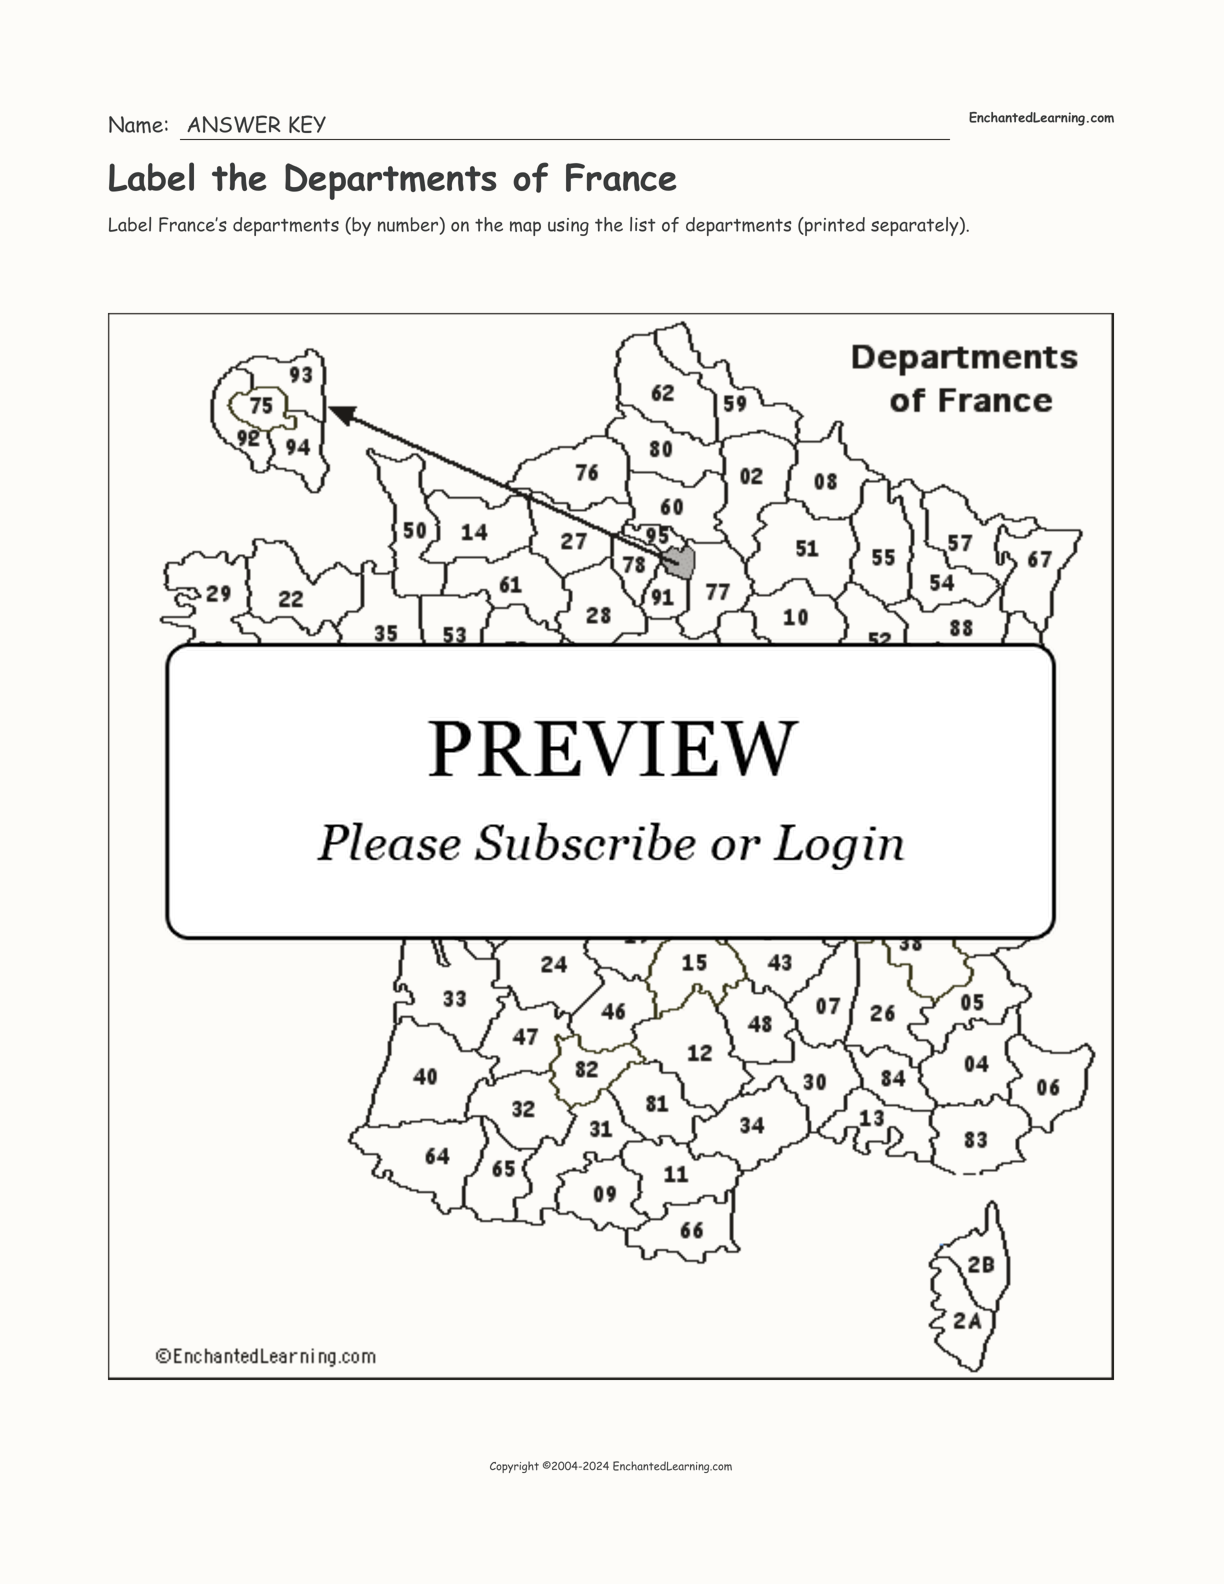 Label the Departments of France interactive worksheet page 2